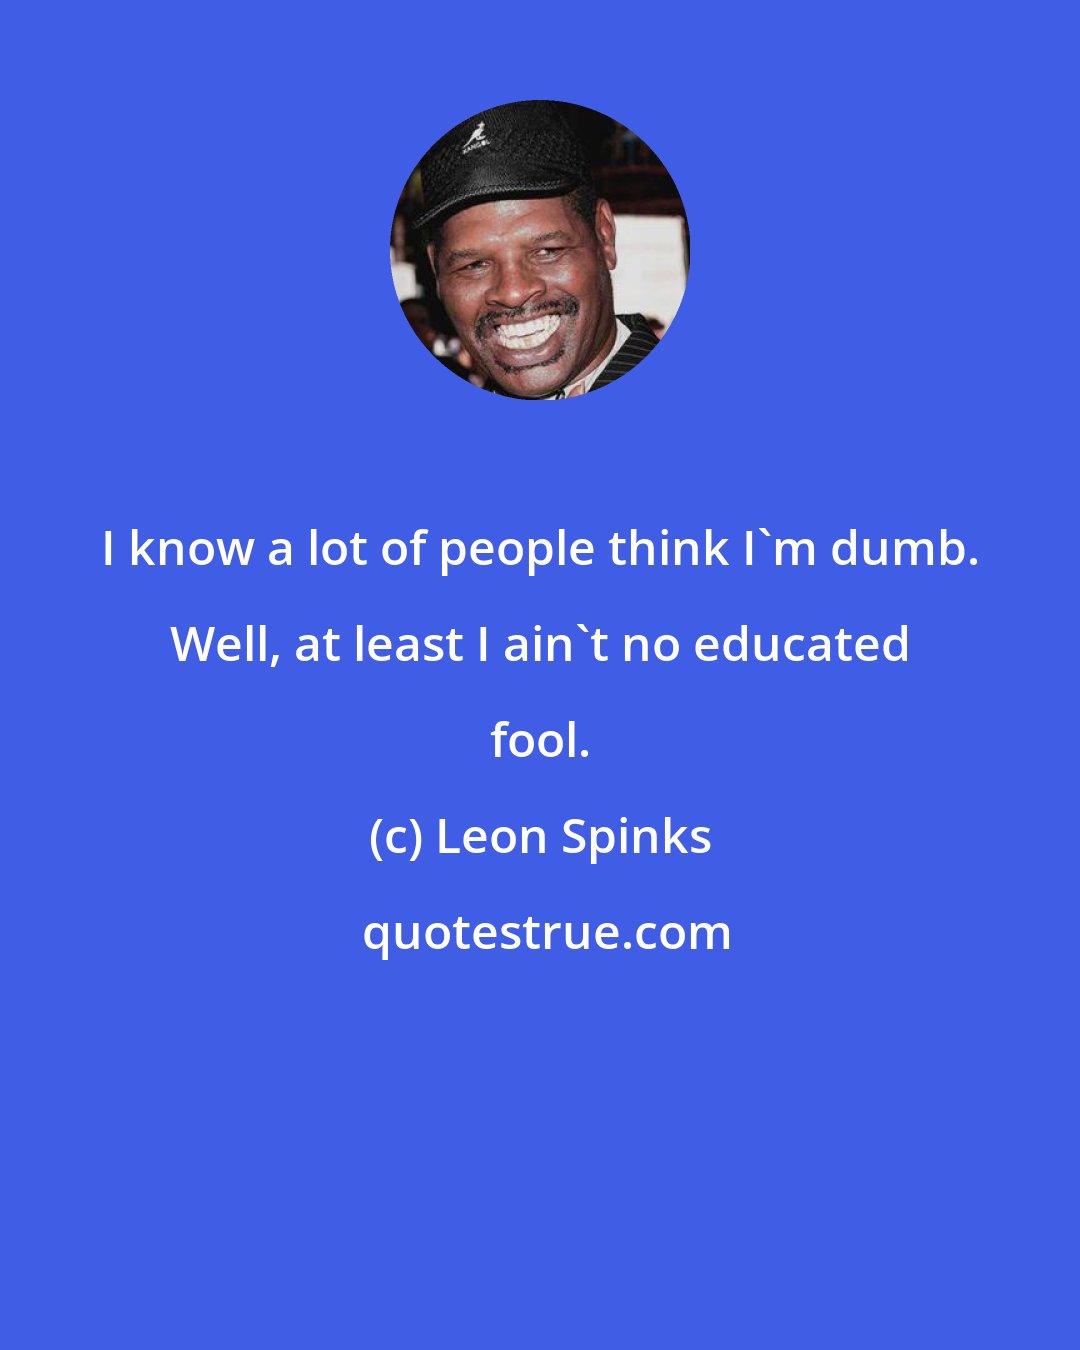 Leon Spinks: I know a lot of people think I'm dumb. Well, at least I ain't no educated fool.